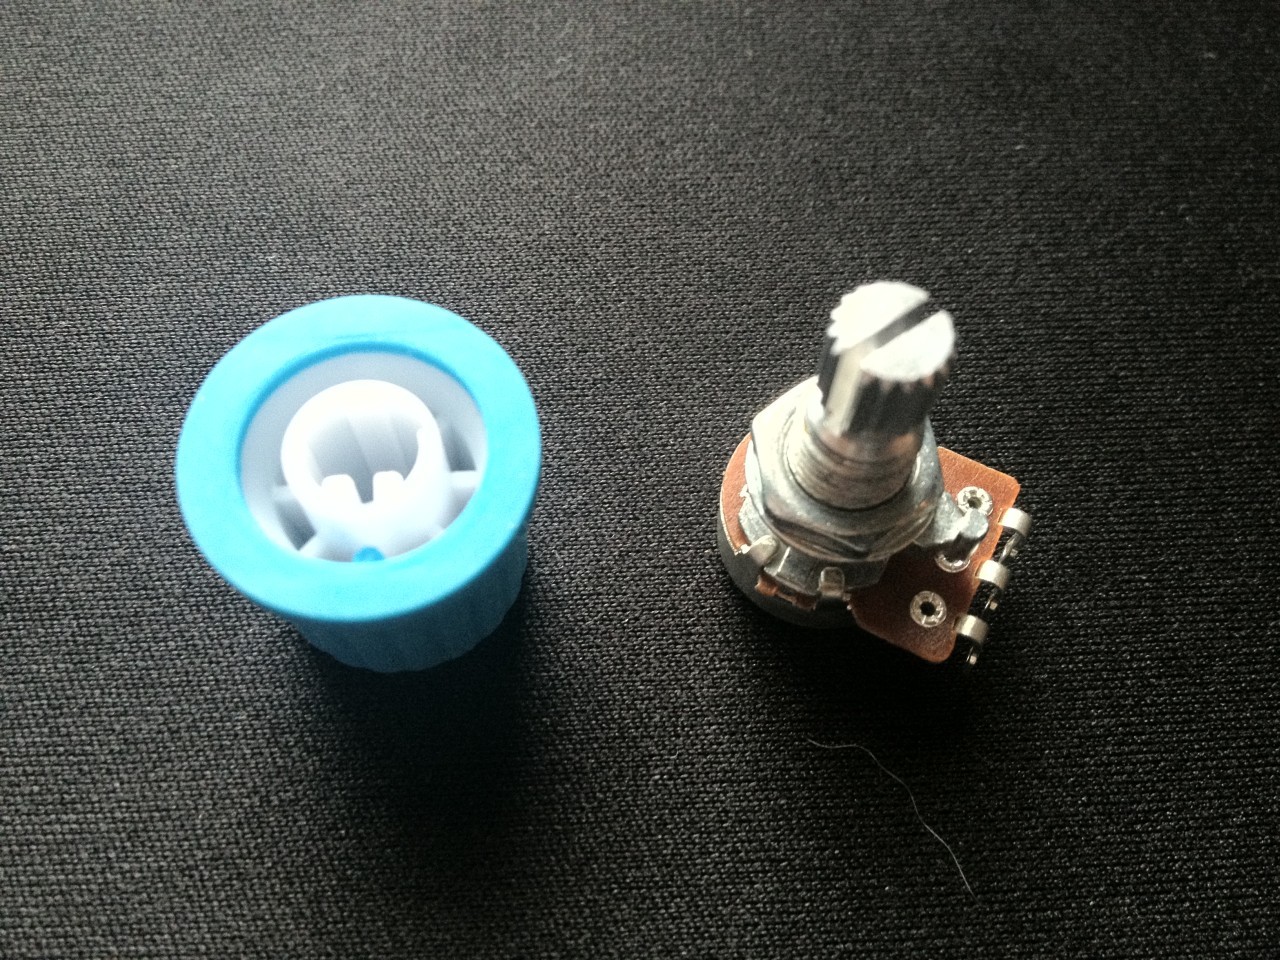 These knurled shaft potentiometers don't fit the D-shaft knobs, but nothing a Dremel, some scrap plastic and glue can't fix.